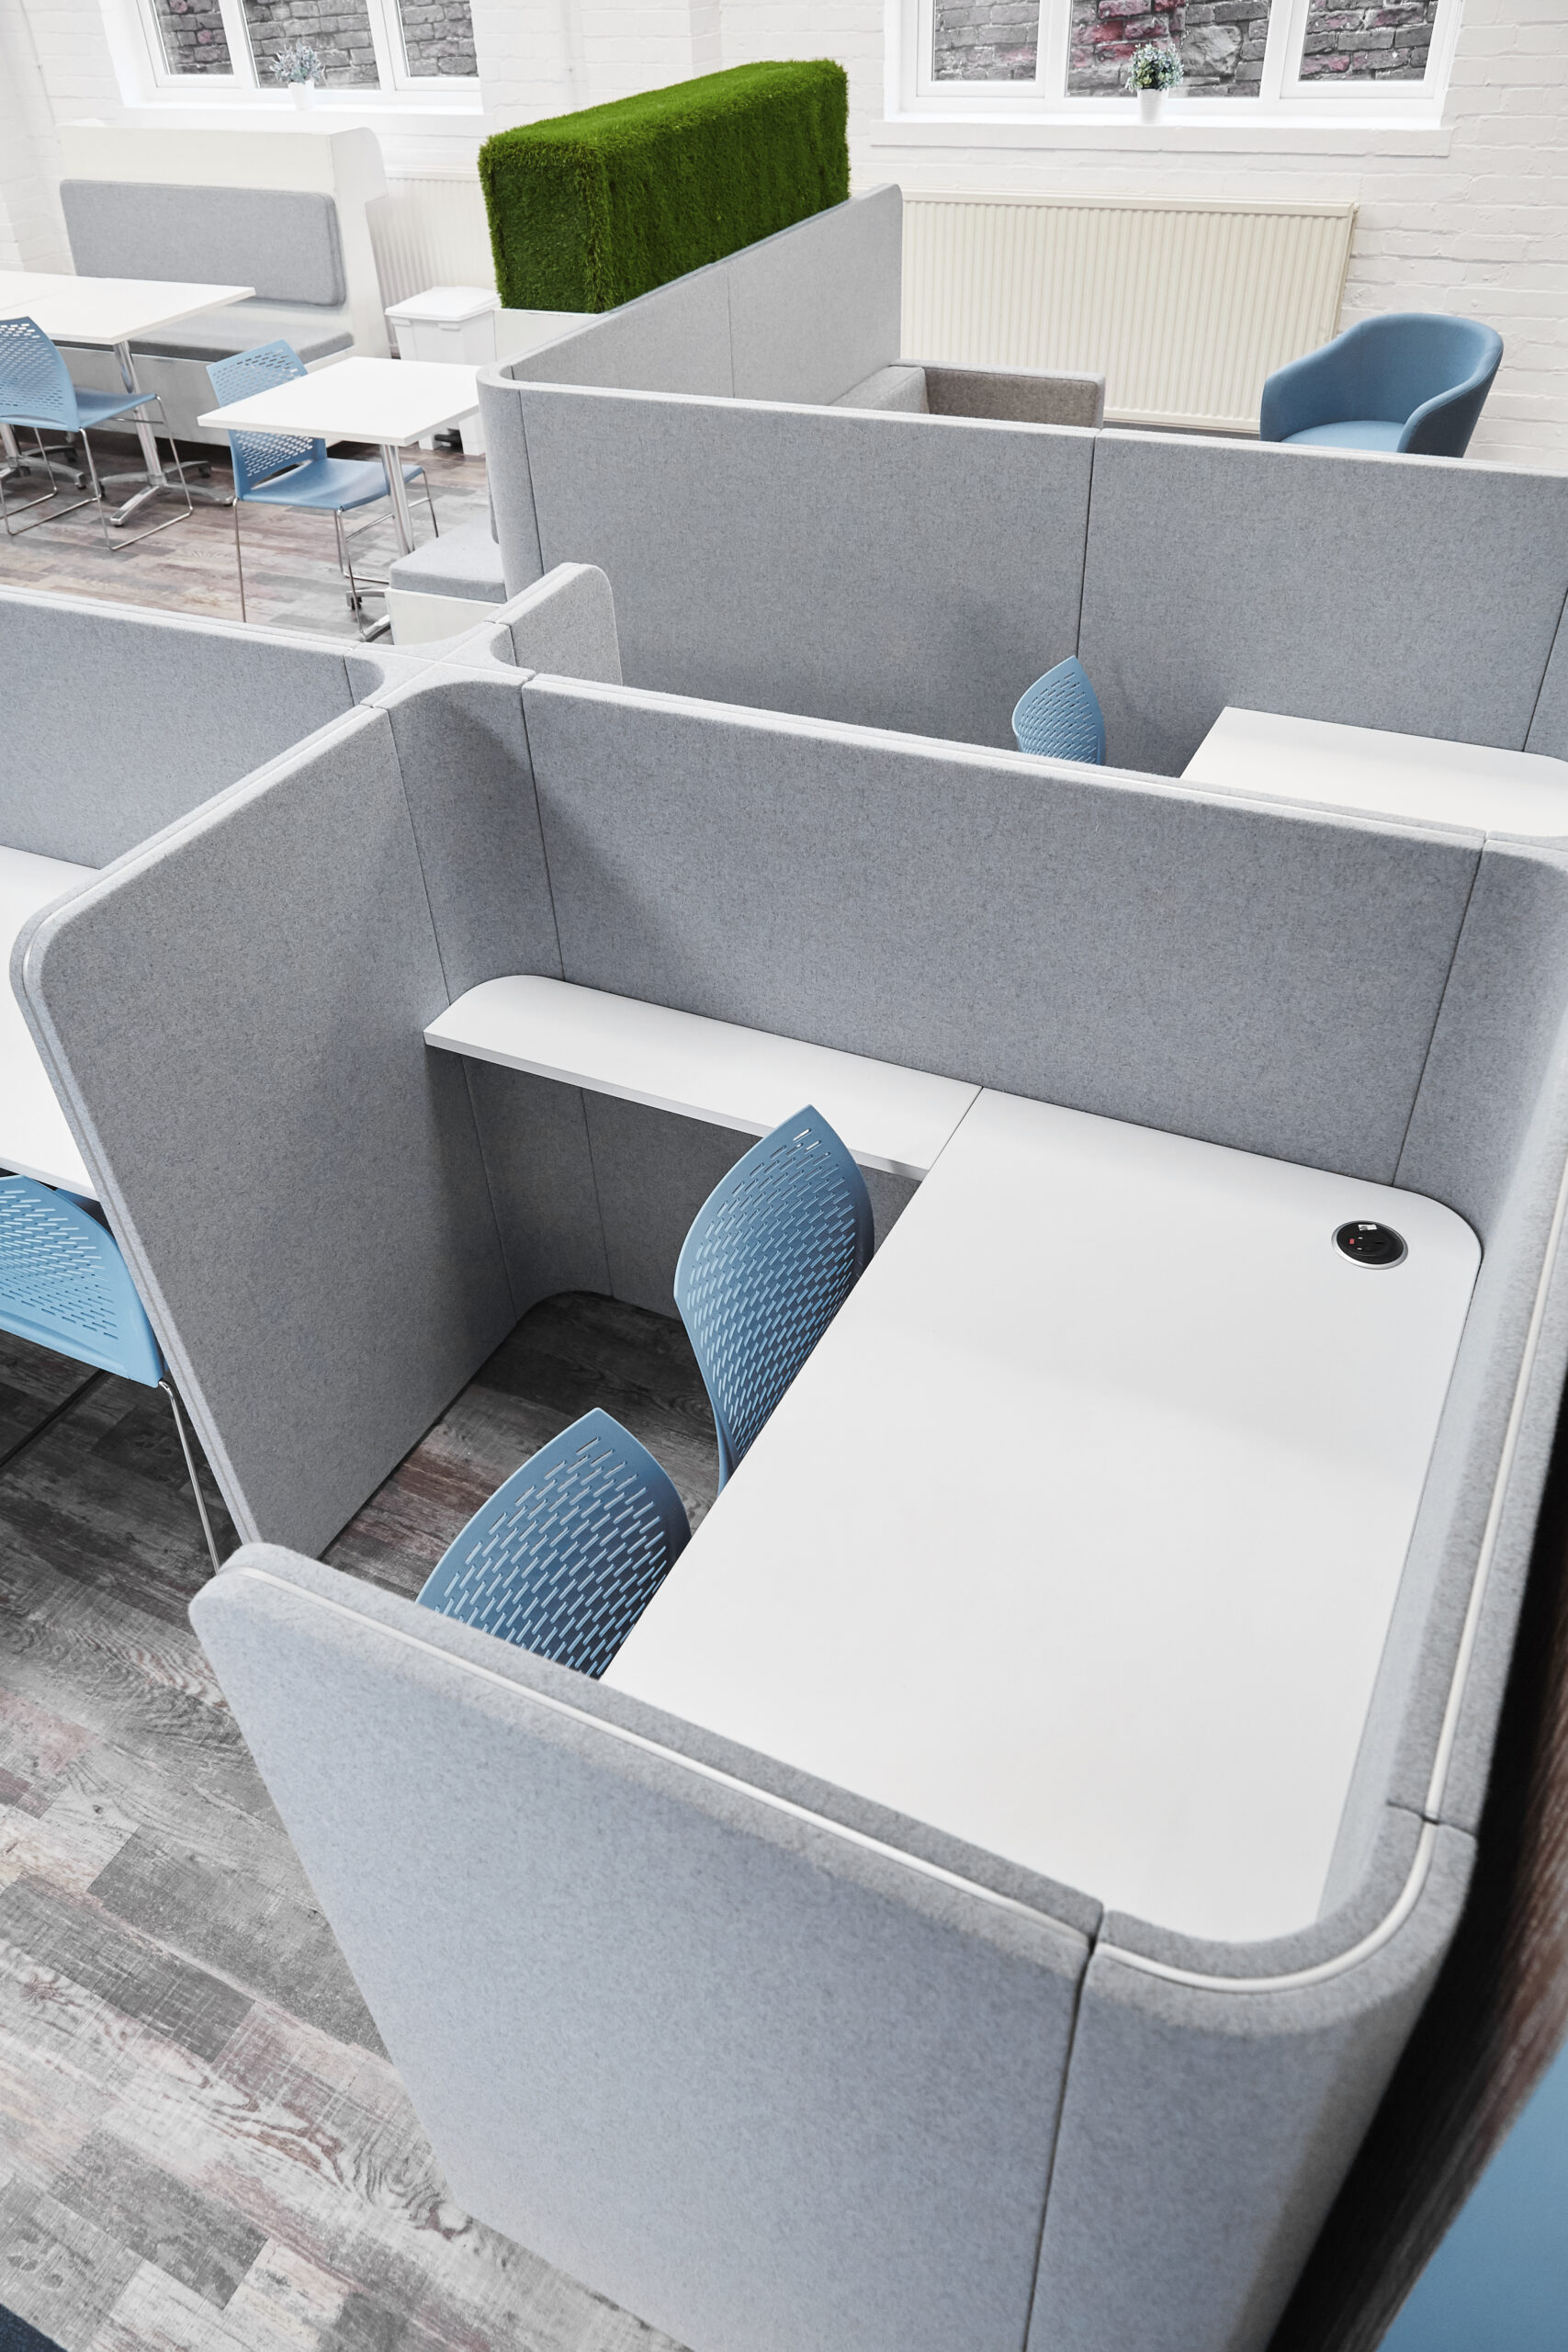 OCEE_FOUR - Work _ Study Booths - Den - Lifestyle Image 2